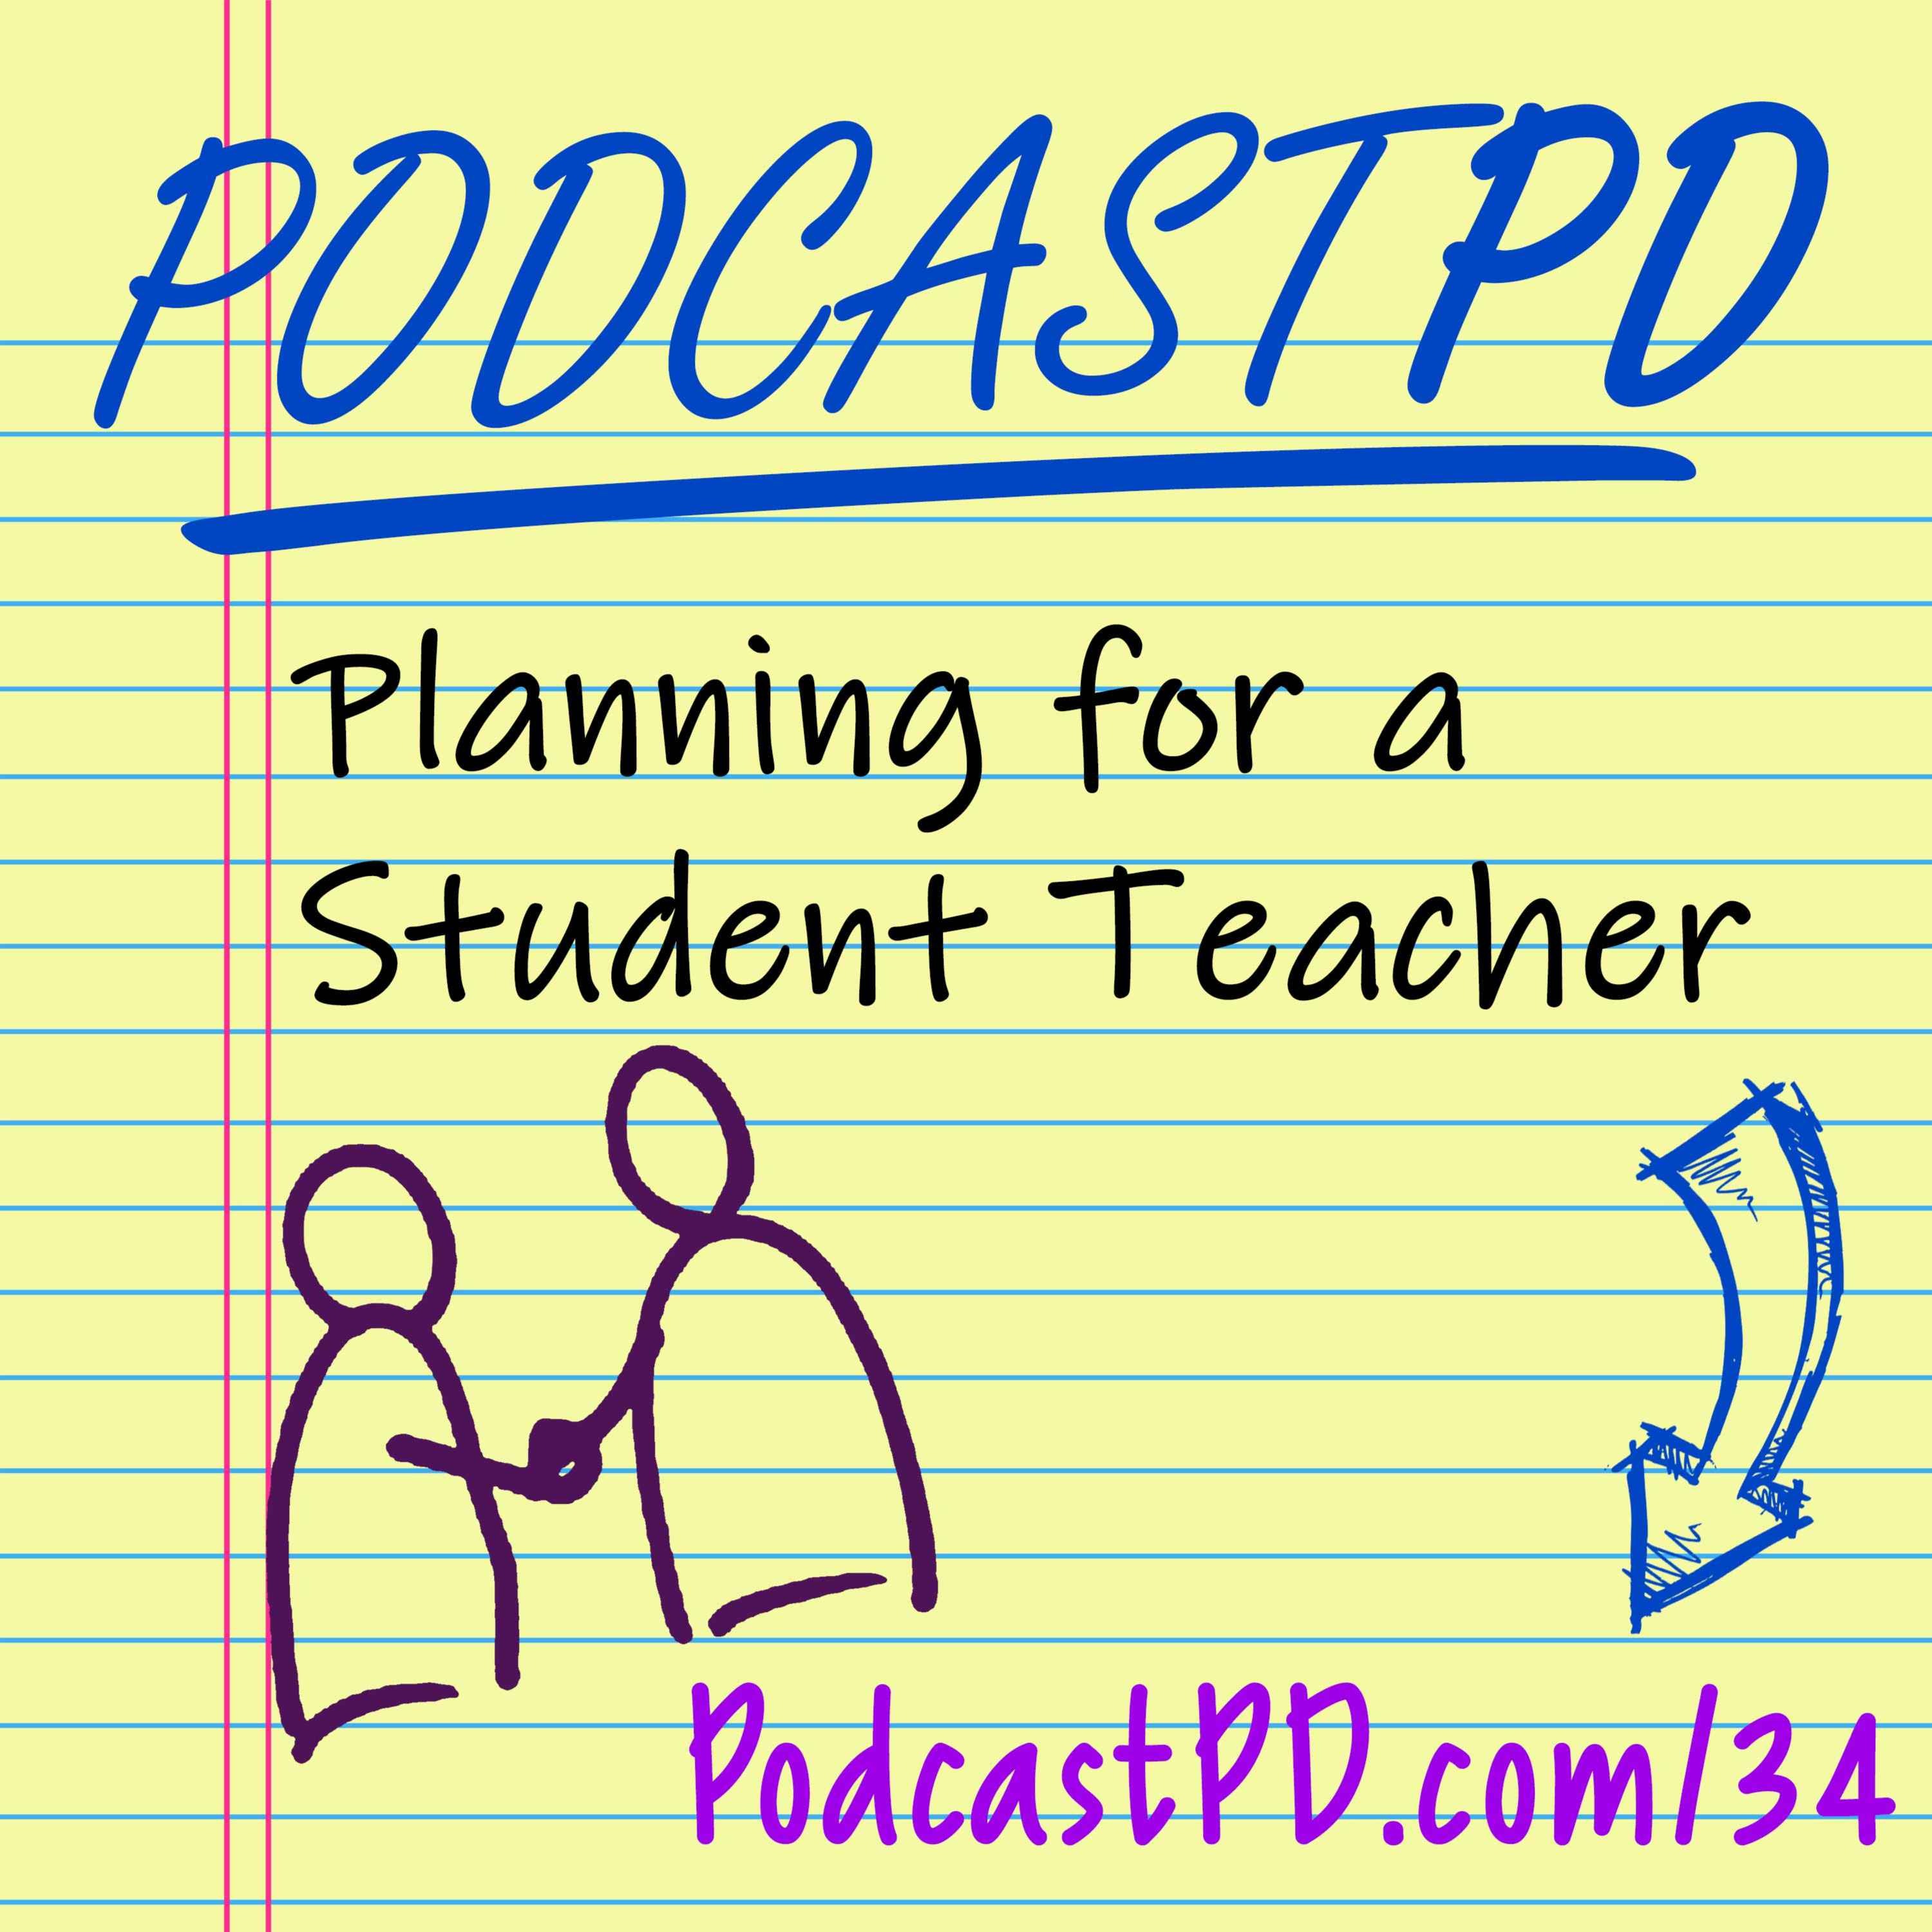 Planning for a Student Teacher -PPD034 Image